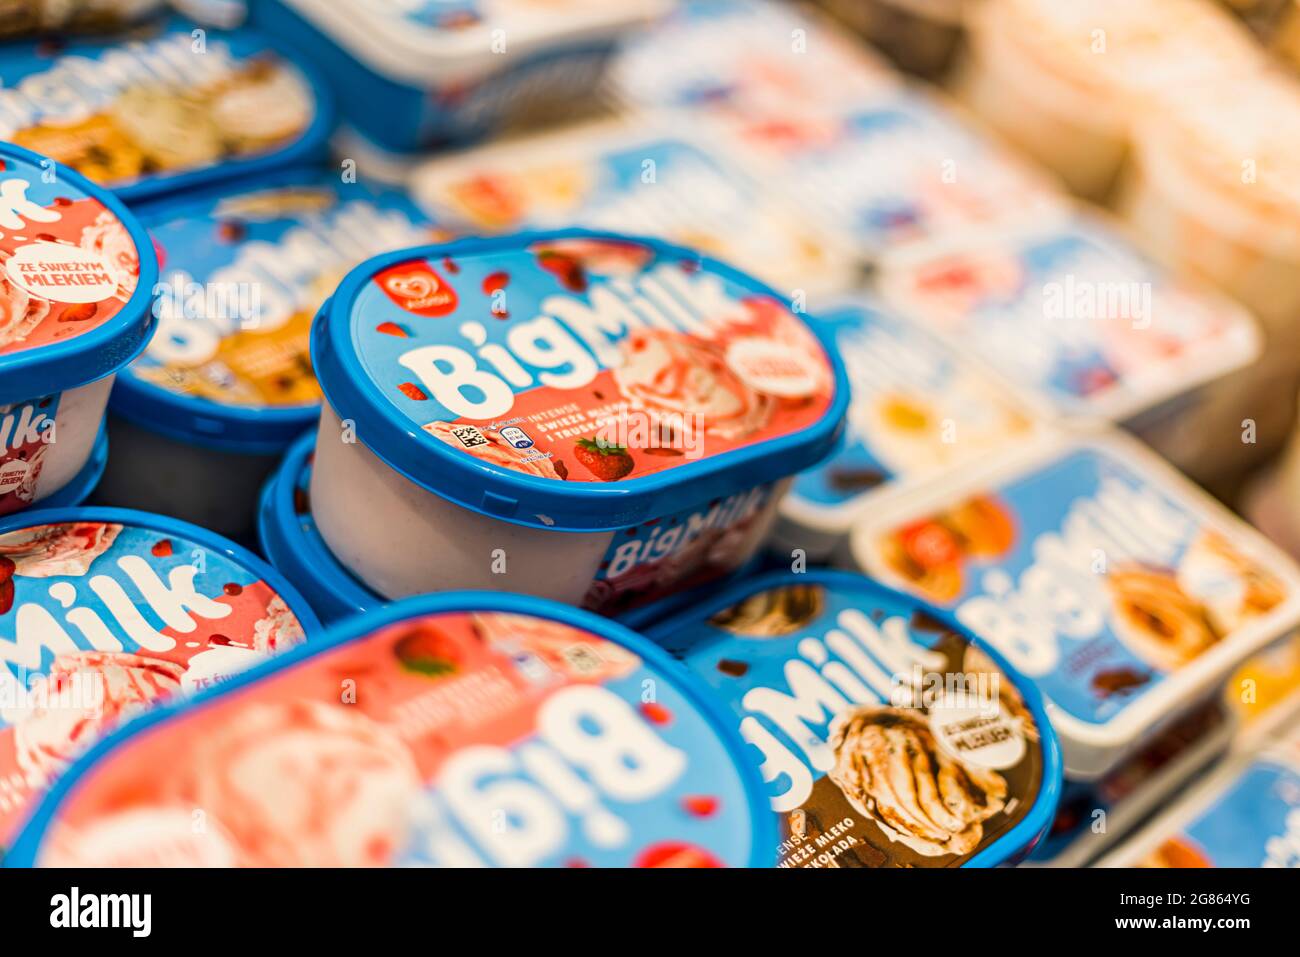 POZNAN, POL - APR 28, 2021: Algida ice cream products put up for sale in a commercial refrigerator Stock Photo